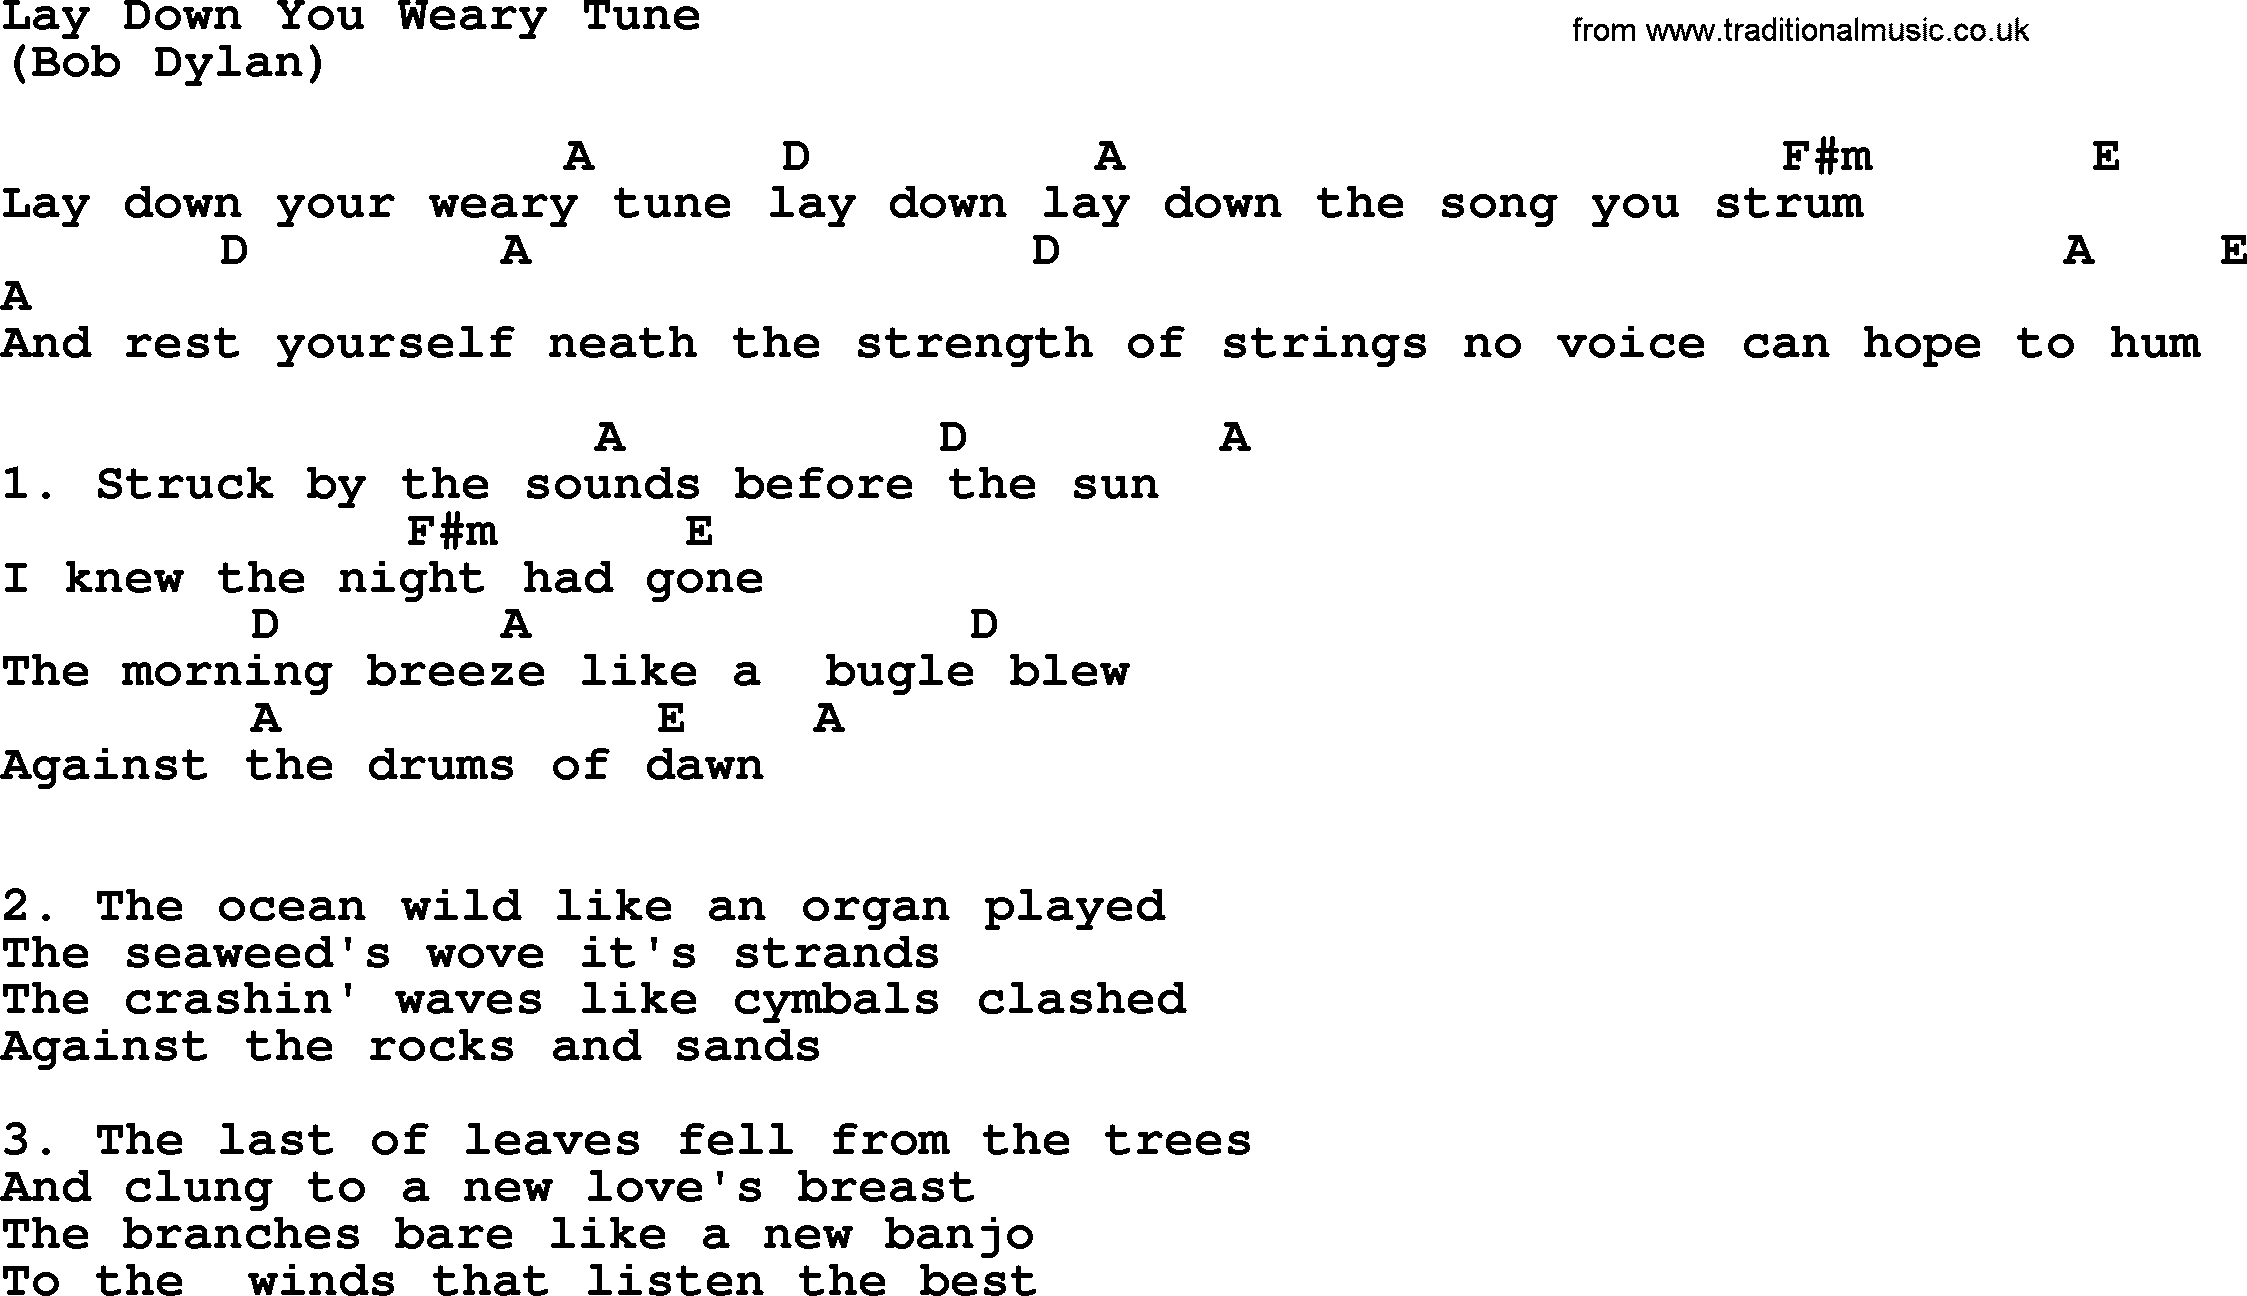 The Byrds song Lay Down You Weary Tune, lyrics and chords